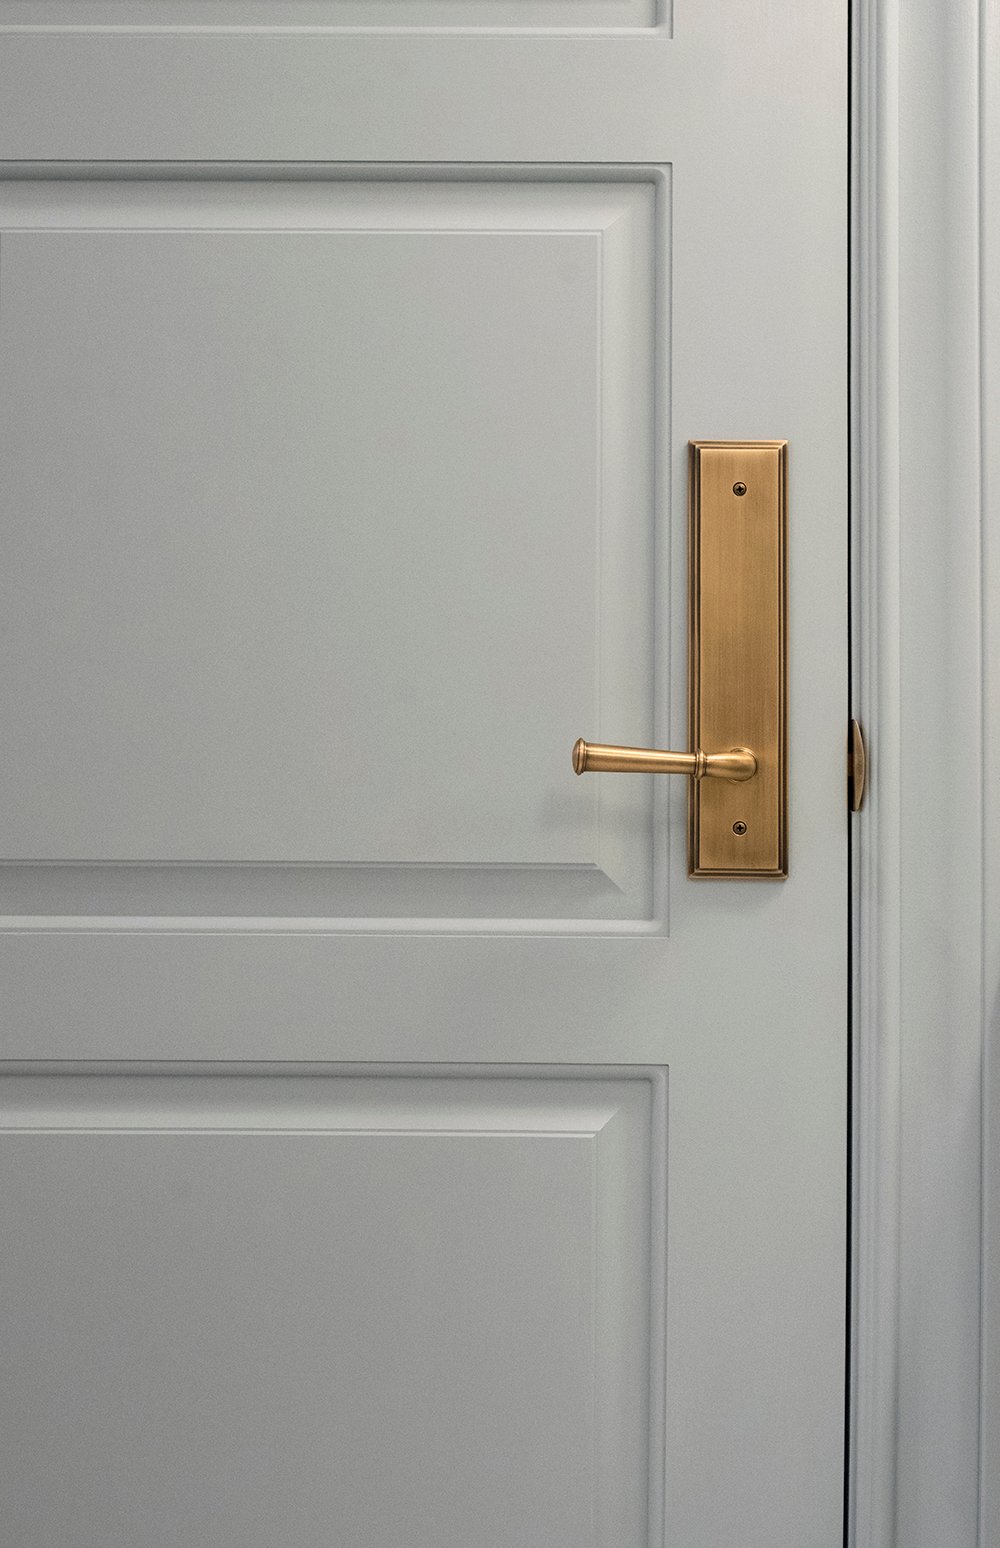 Selecting My Interior Doors & Hardware Style - roomfortuesday.com